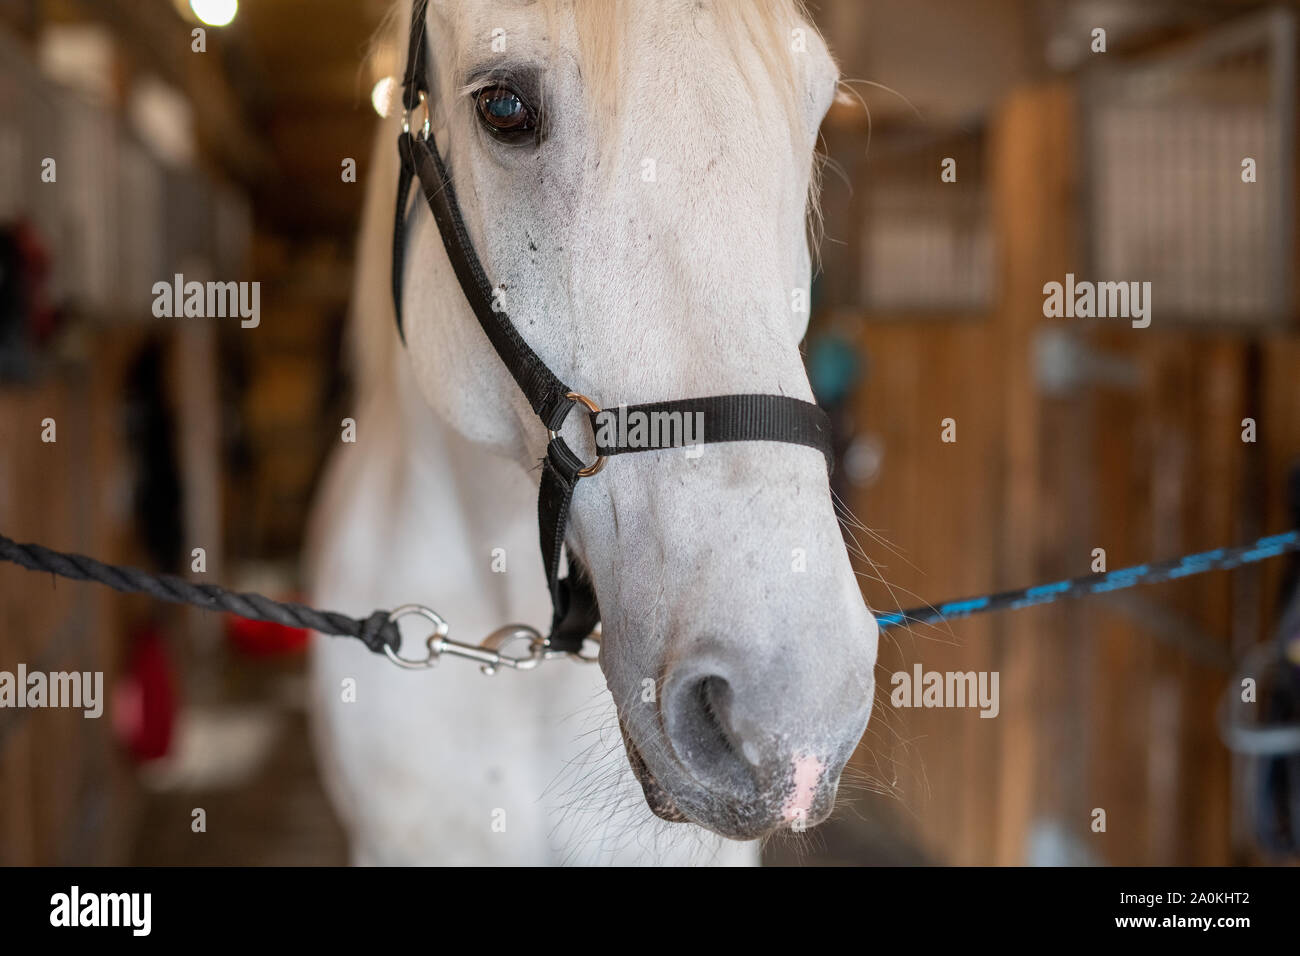 Muzzle of young white purebred mare or racehorse with bridles in front of camera Stock Photo